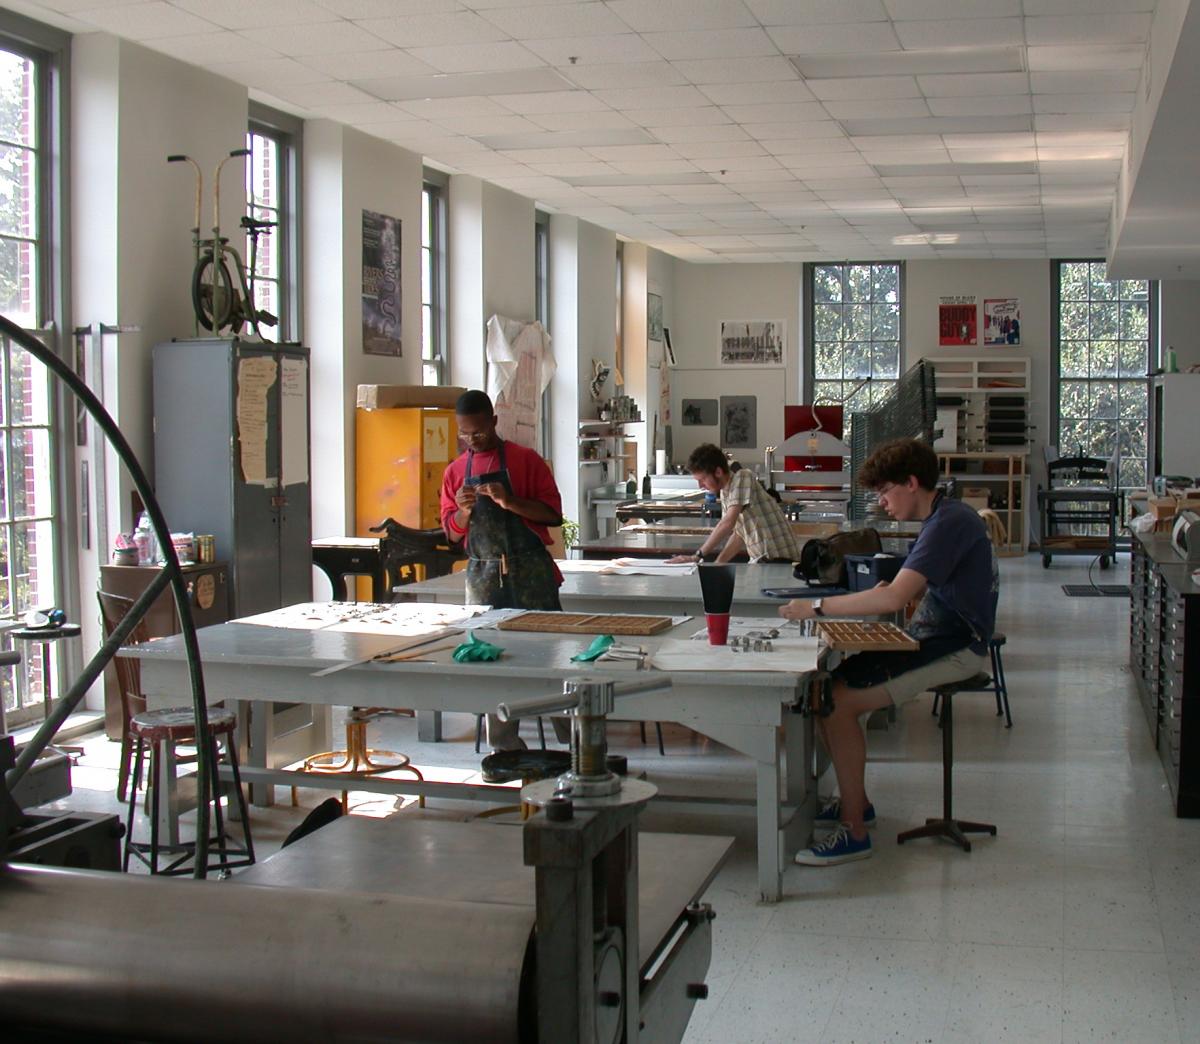 Students in the Newcomb Art Department Print Shop